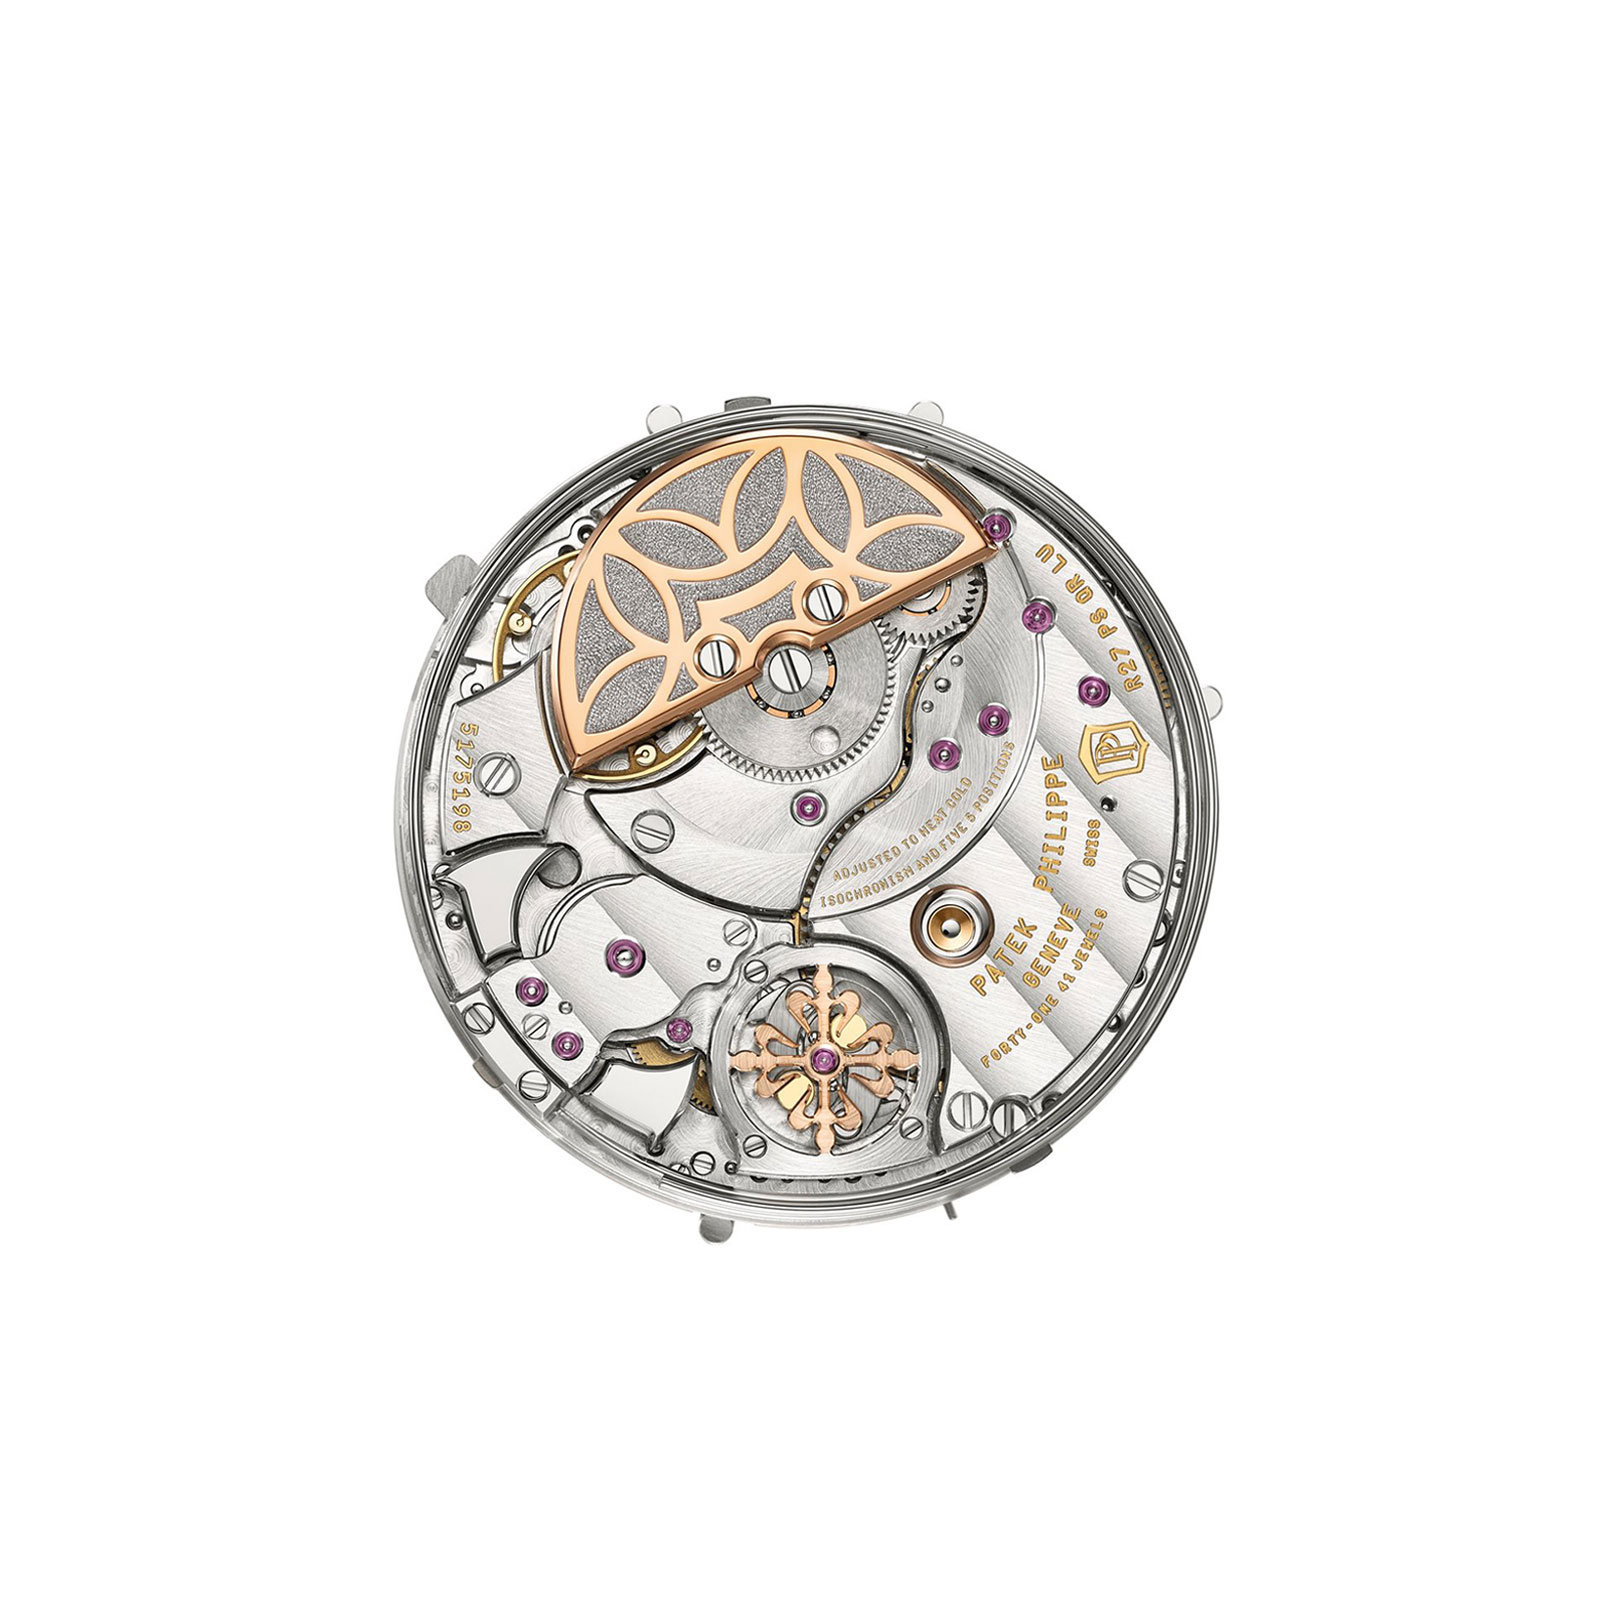 Grand Complications Minute Repeater gallery 7